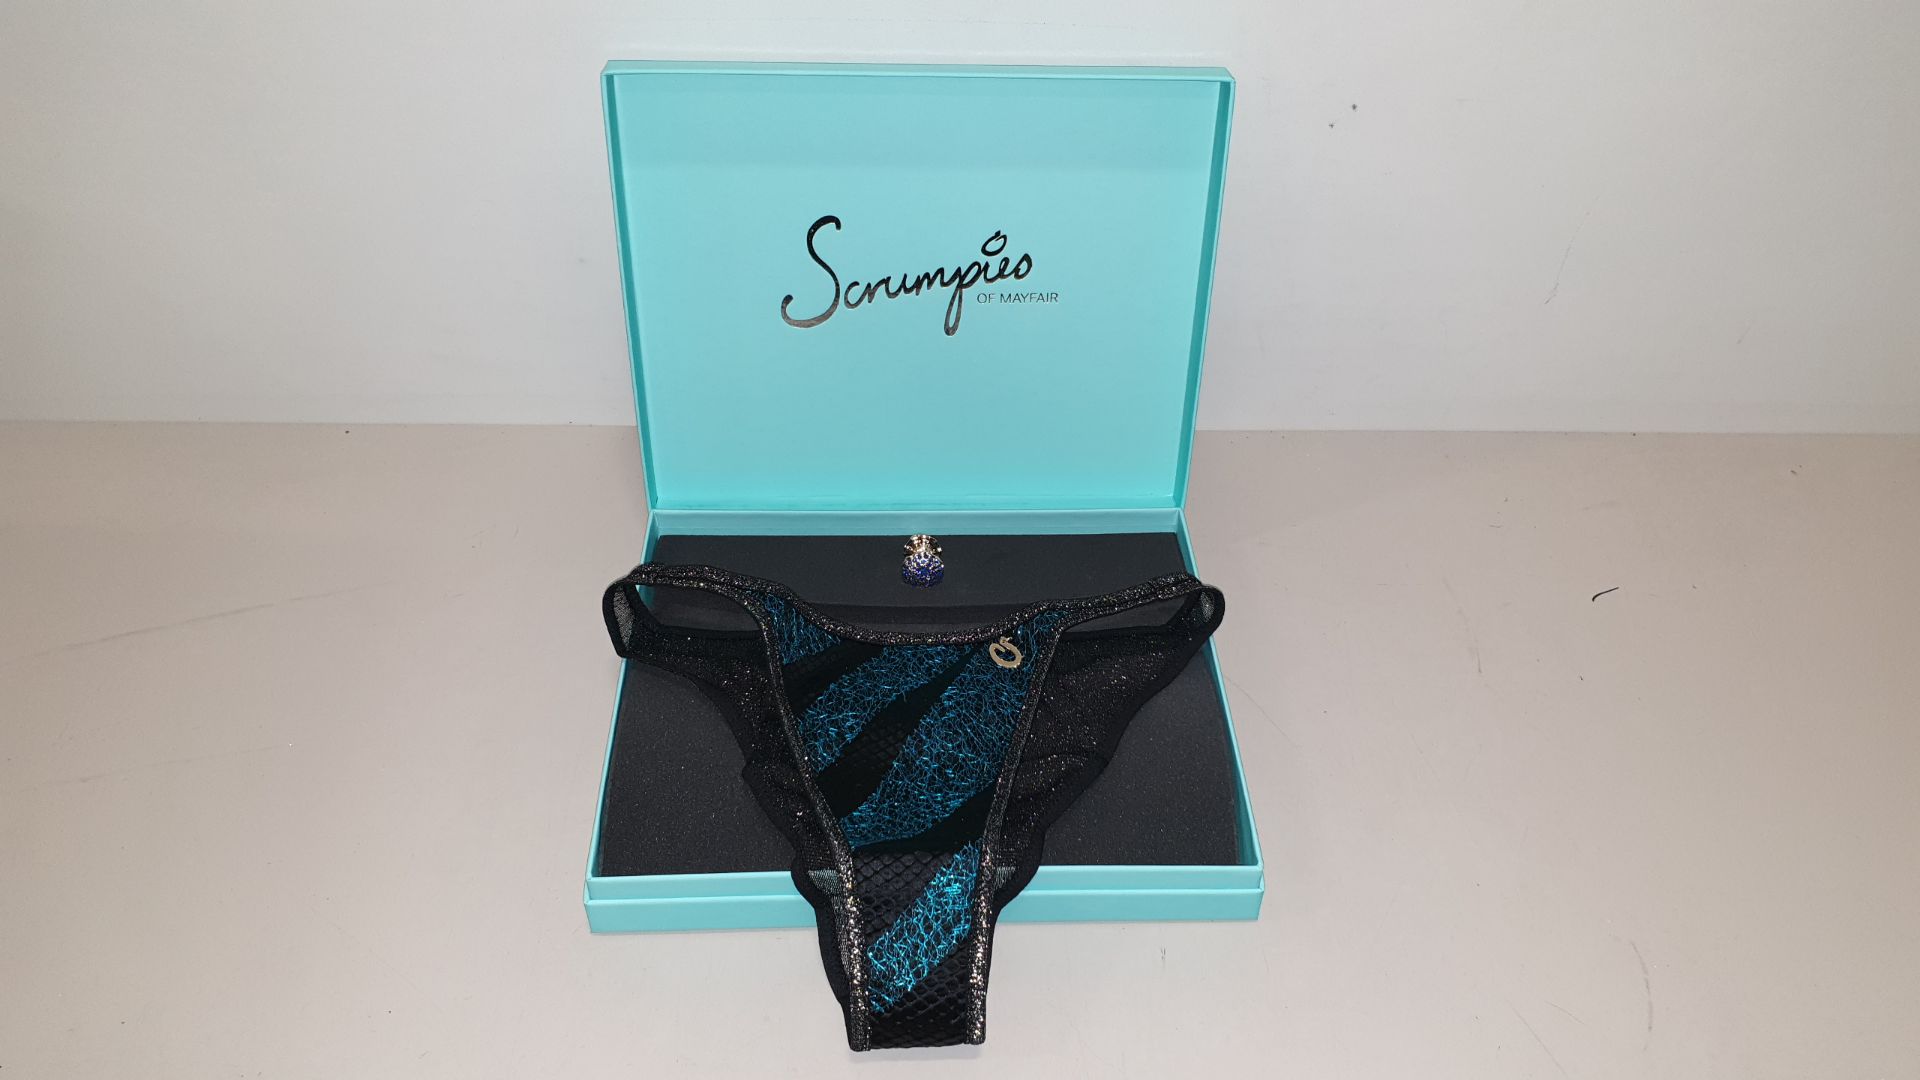 50 X SCRUMPIES OF MAYFAIR DRAGONSNAP ICE TANGA BRIEFS - SIZES 8-16 (1-5) WITH BAG OF 50 CHARMS AND